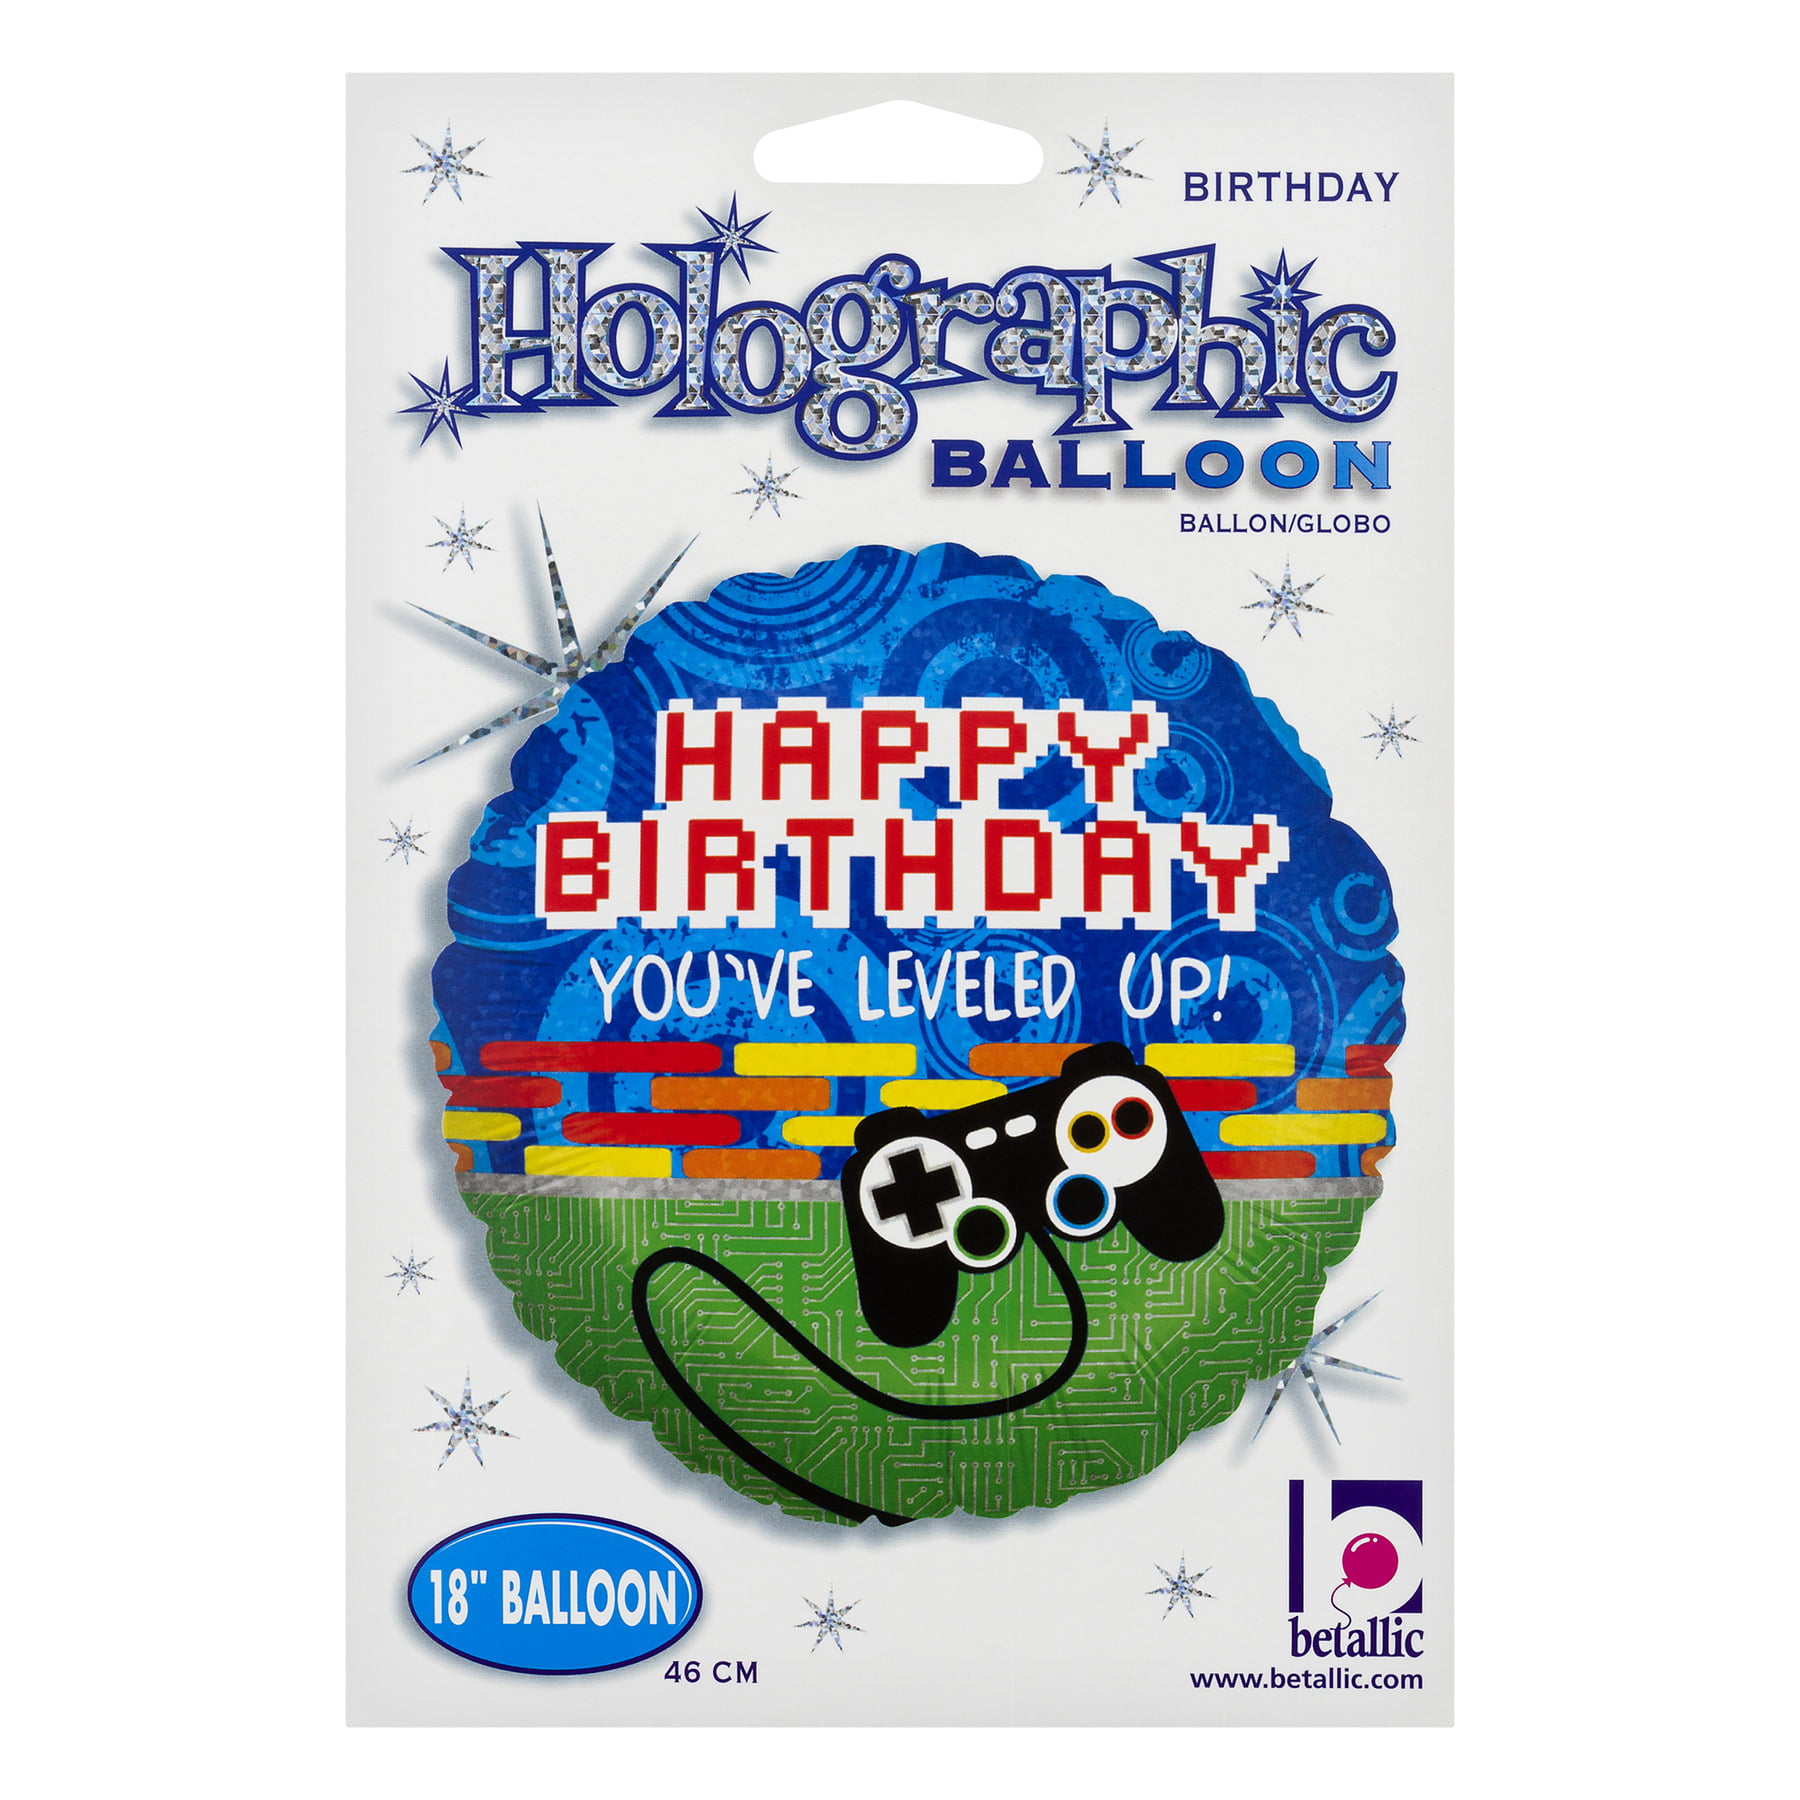 Details about   Disney Mickey Mouse Pluto It's Your Birthday Balloon Birthday Greetings Card 